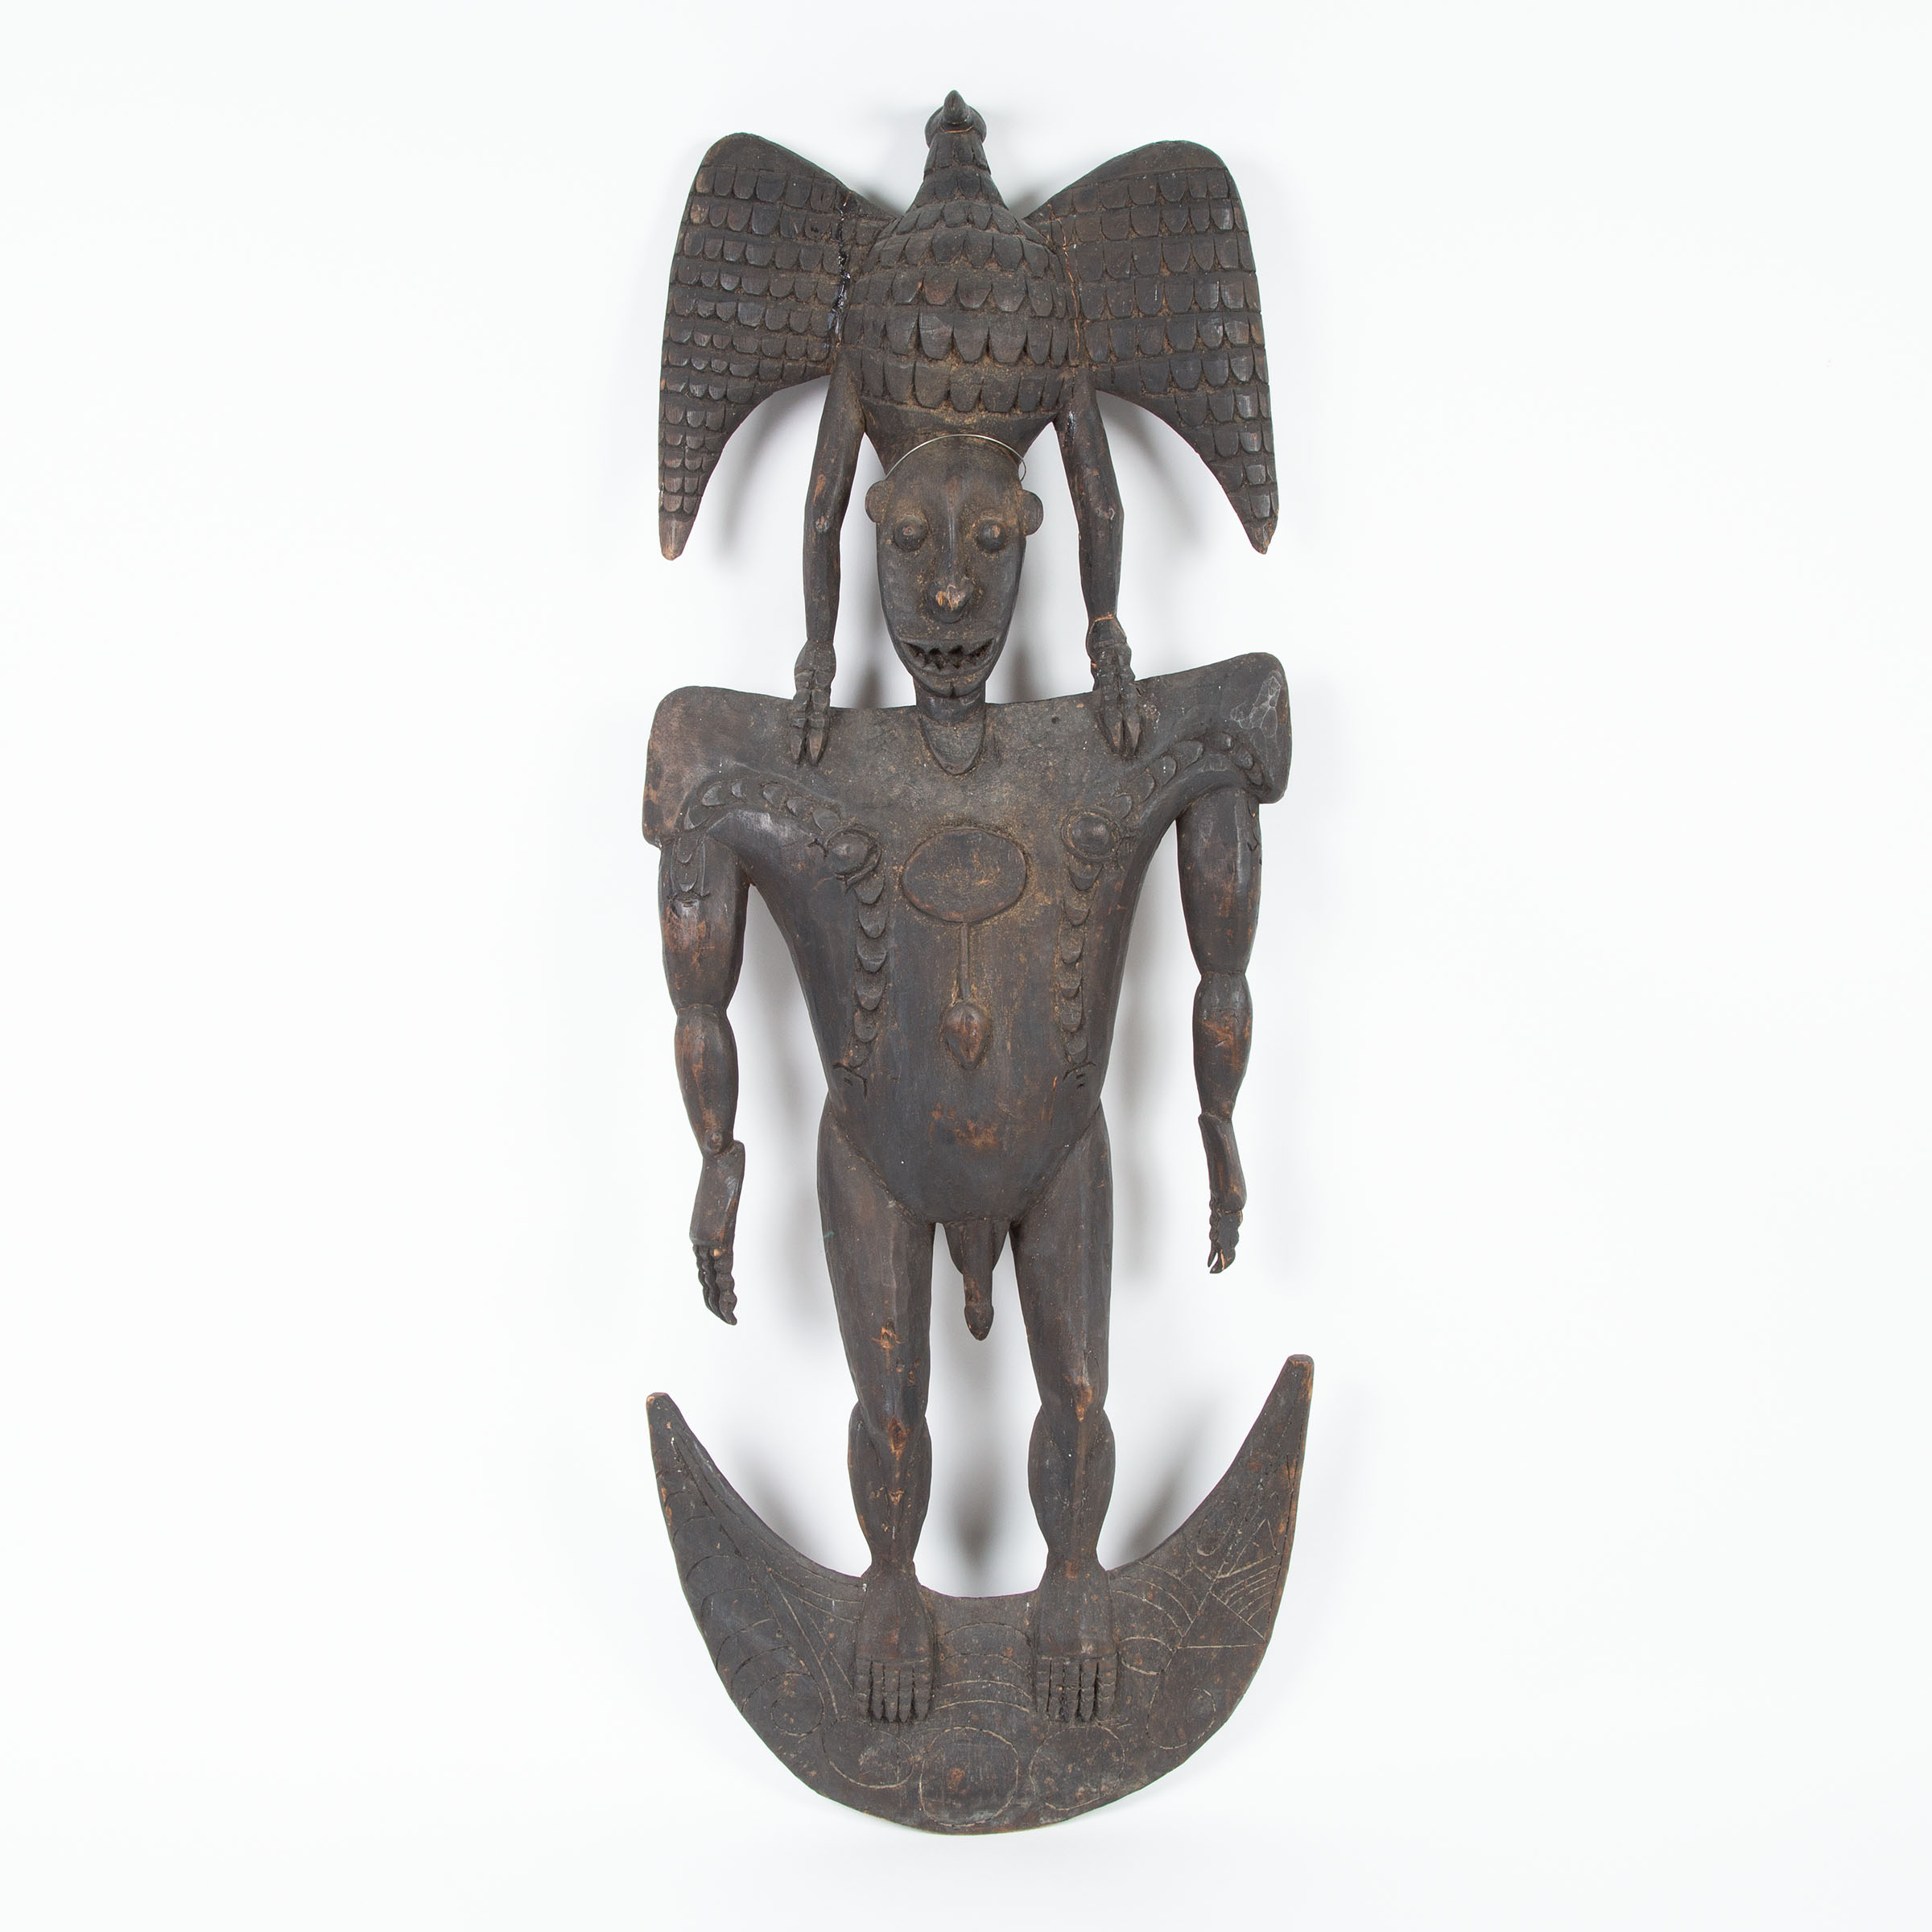 Papua New Guinea Figural Suspension/Food Hook with Bird Surmount, early 20th century